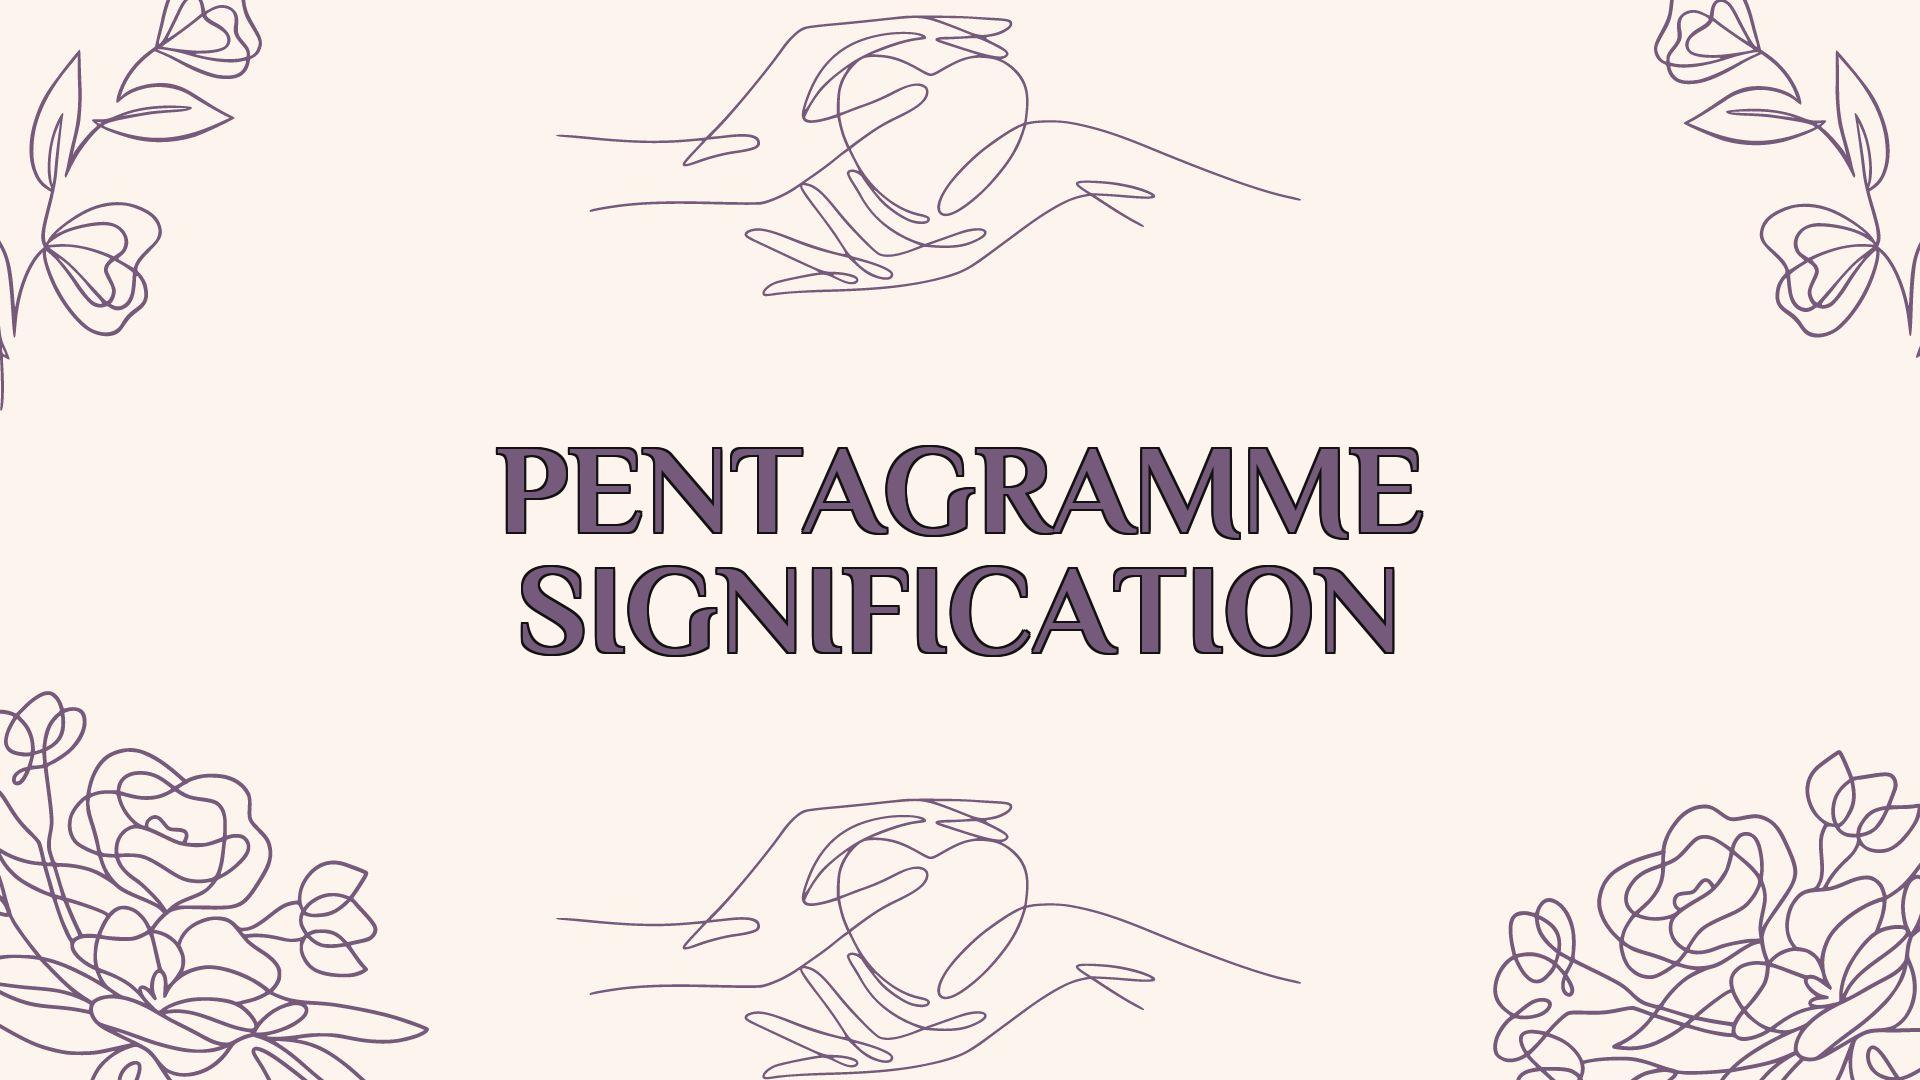 pentagramme signification